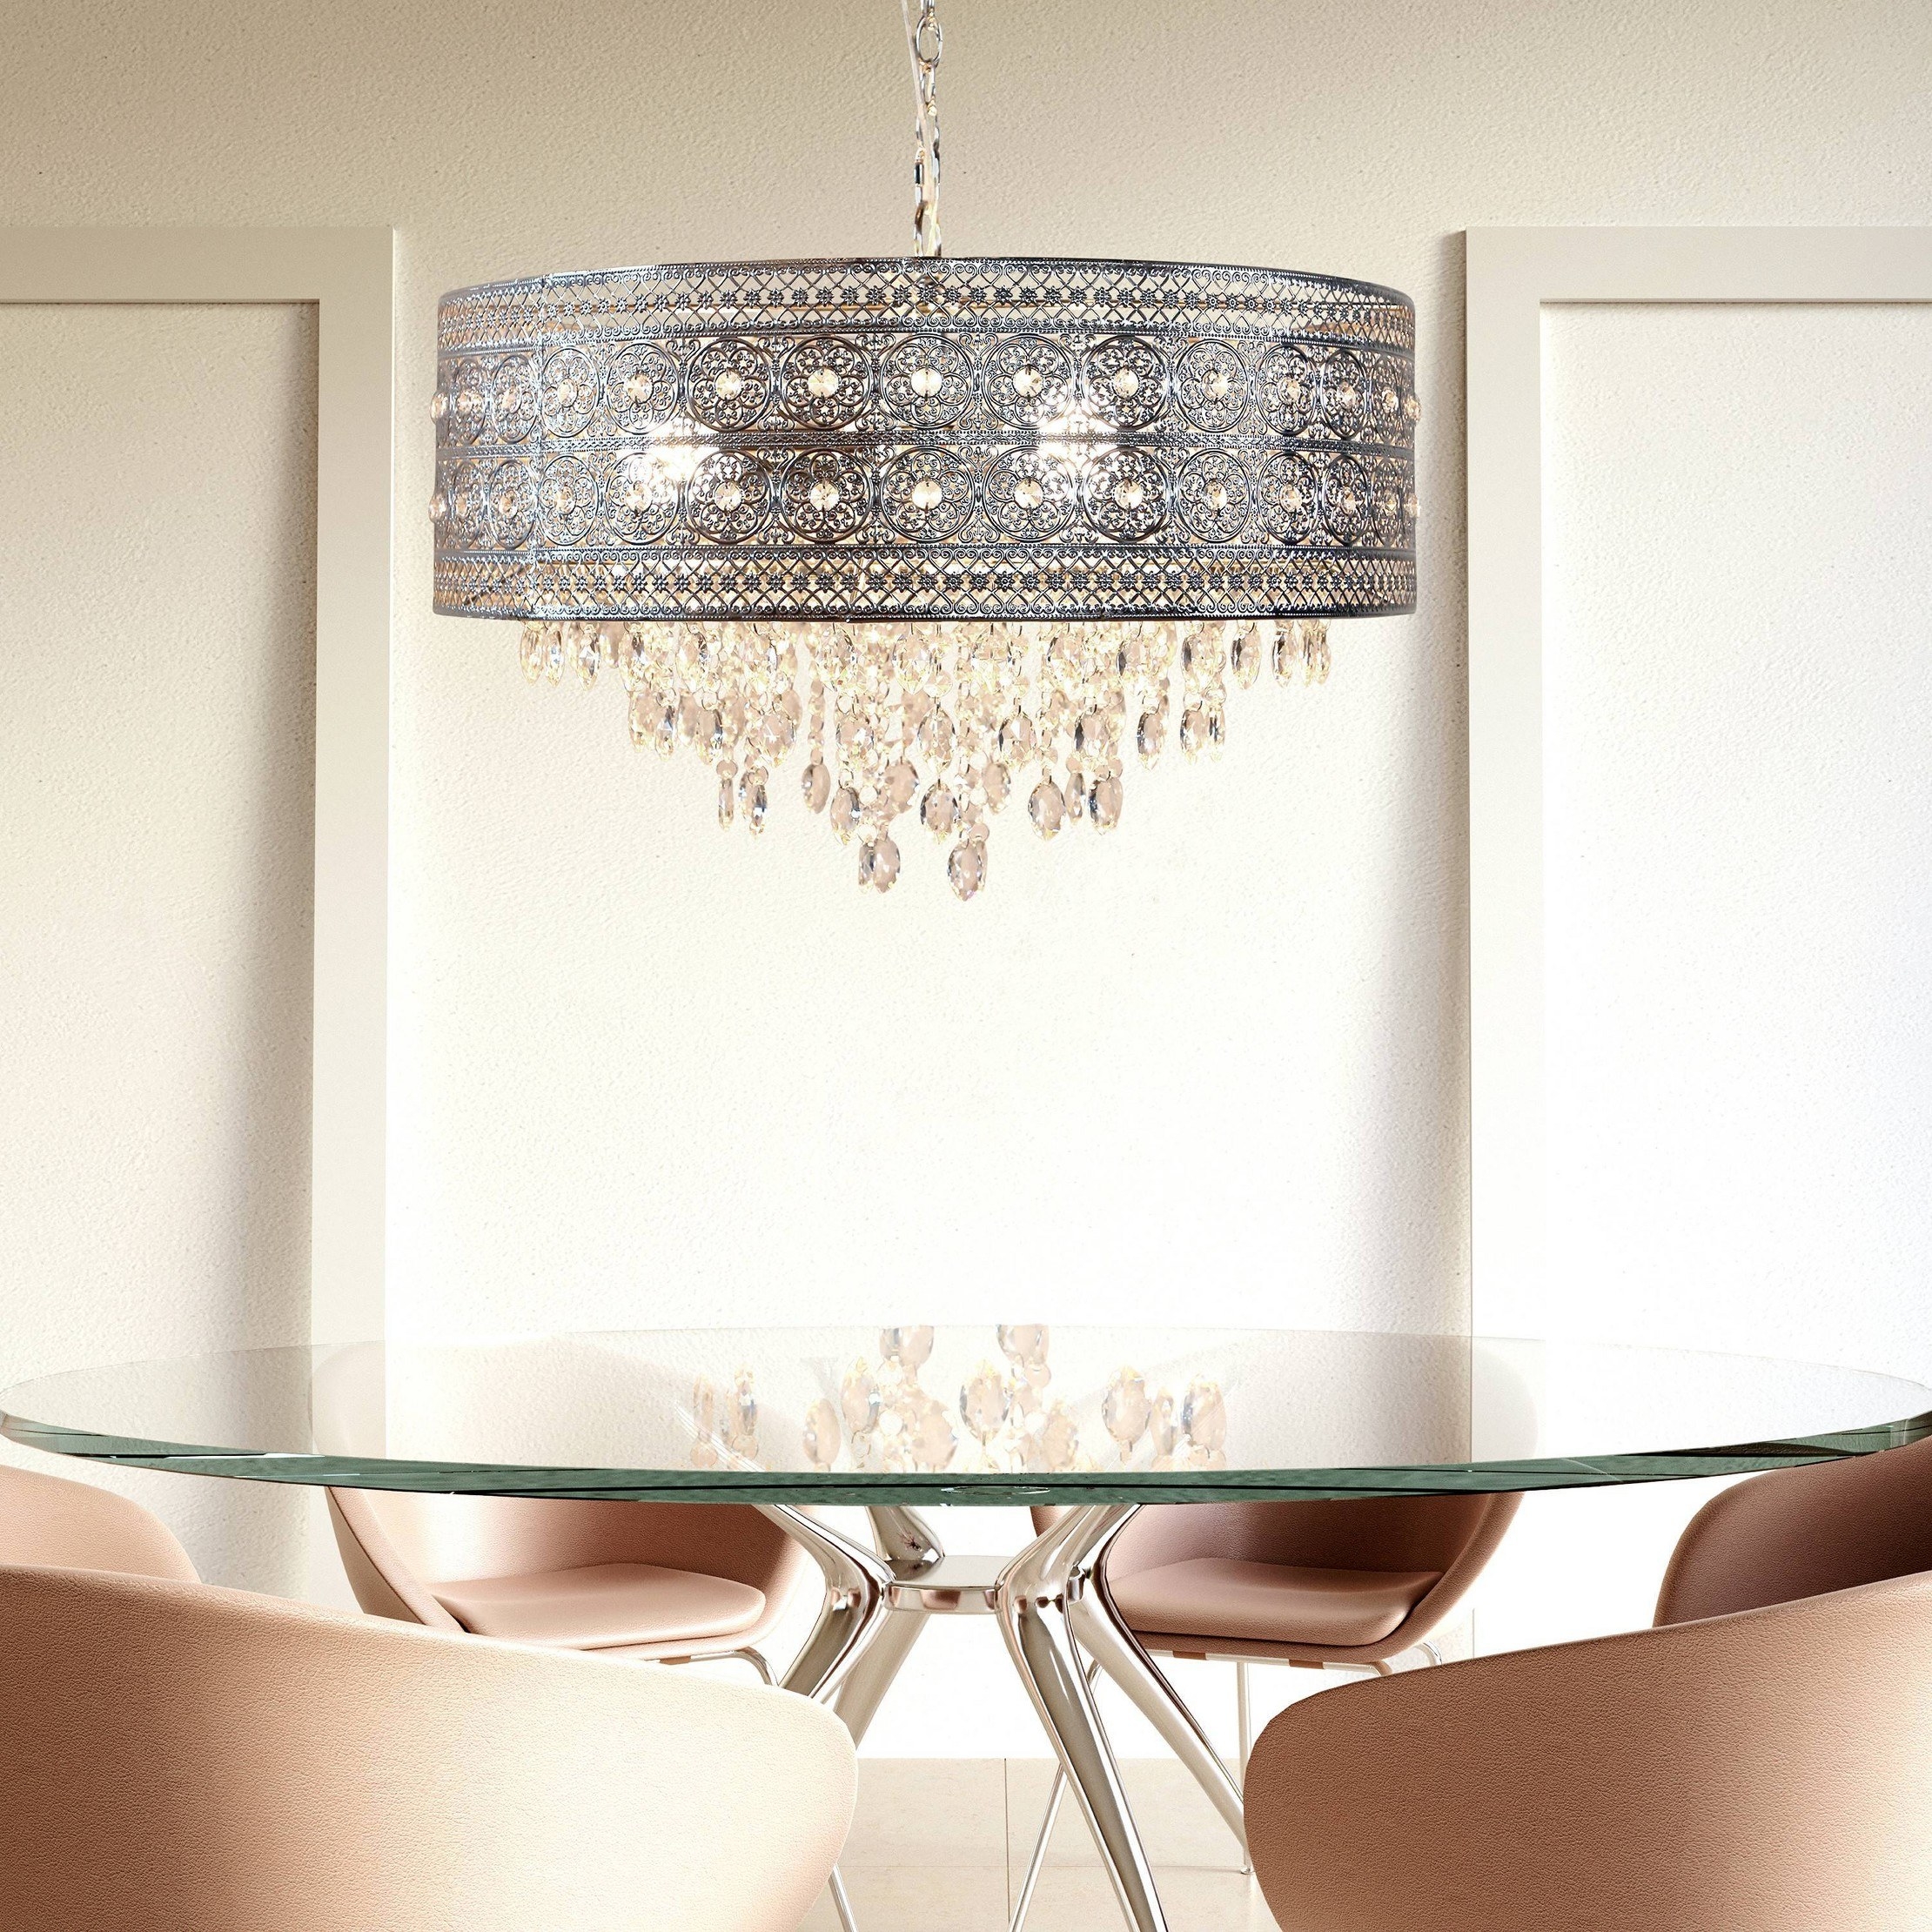 the polished nickel and crystal chandelier hanging over a glass dining table